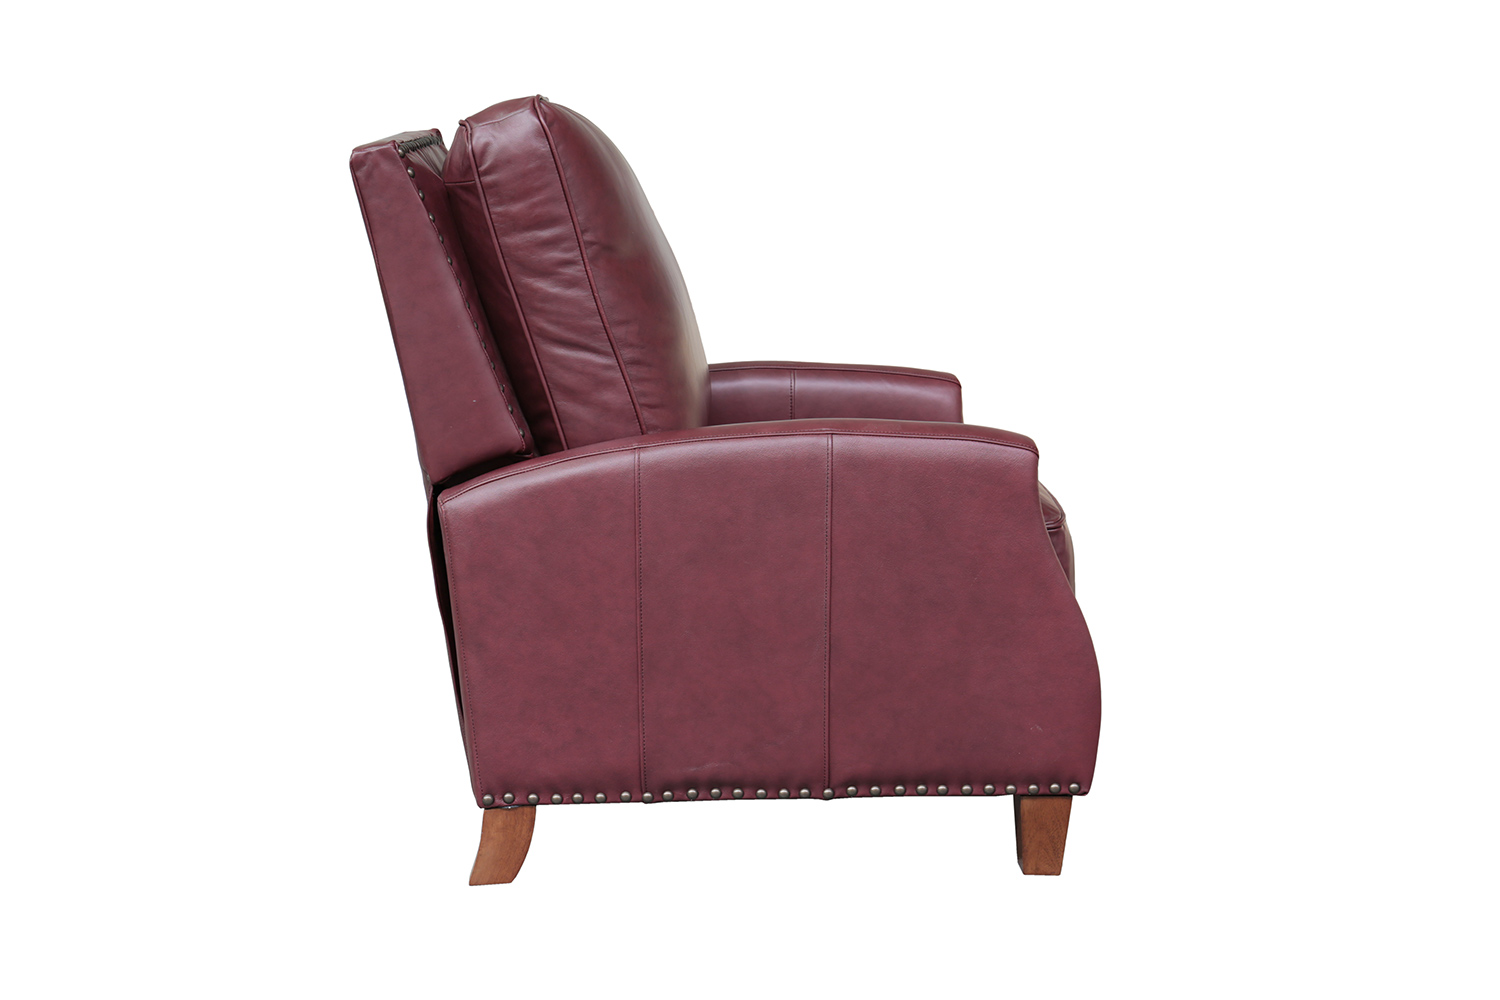 Barcalounger Melrose Recliner Chair - Shoreham Wine/All Leather